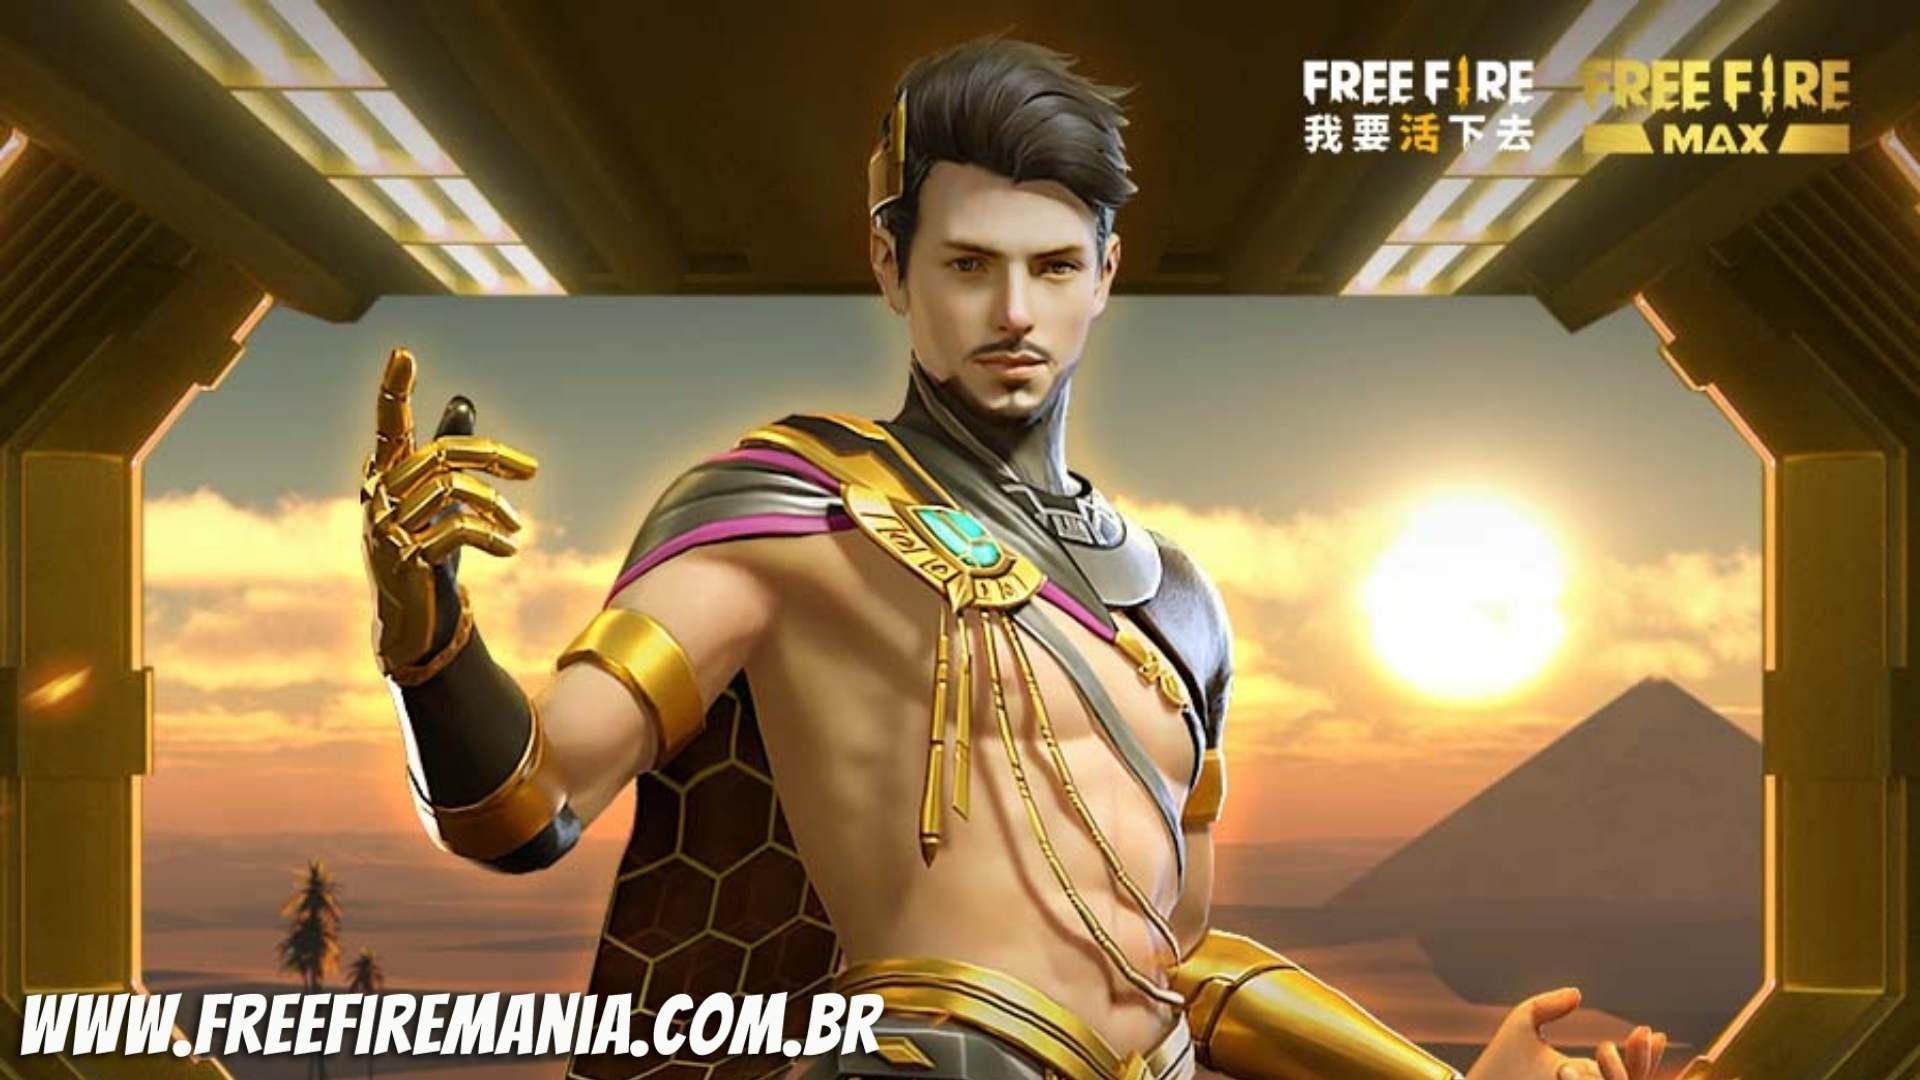 How many downloads does Free Fire have? Free Fire Mania